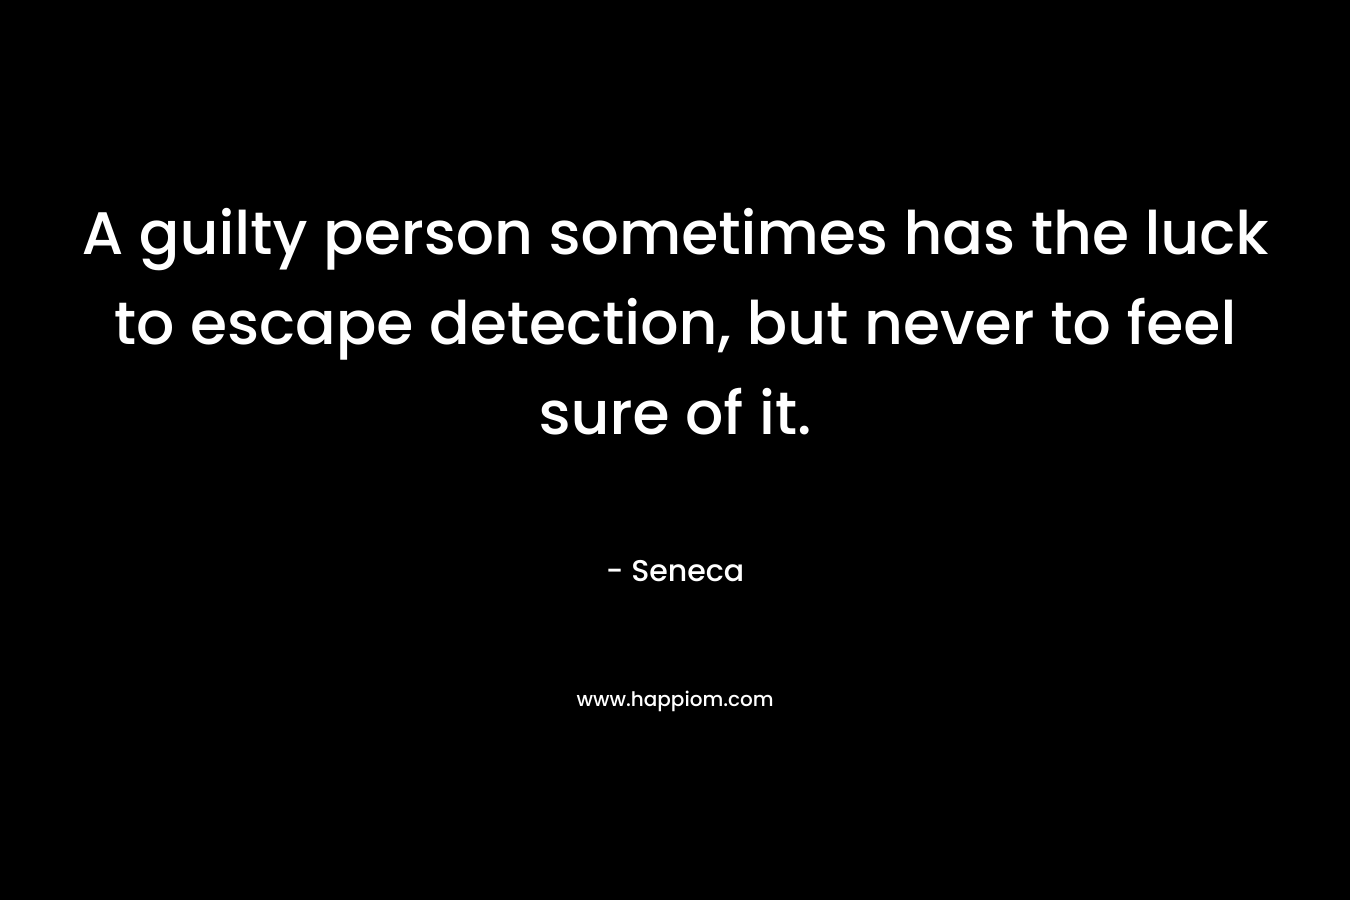 A guilty person sometimes has the luck to escape detection, but never to feel sure of it. – Seneca